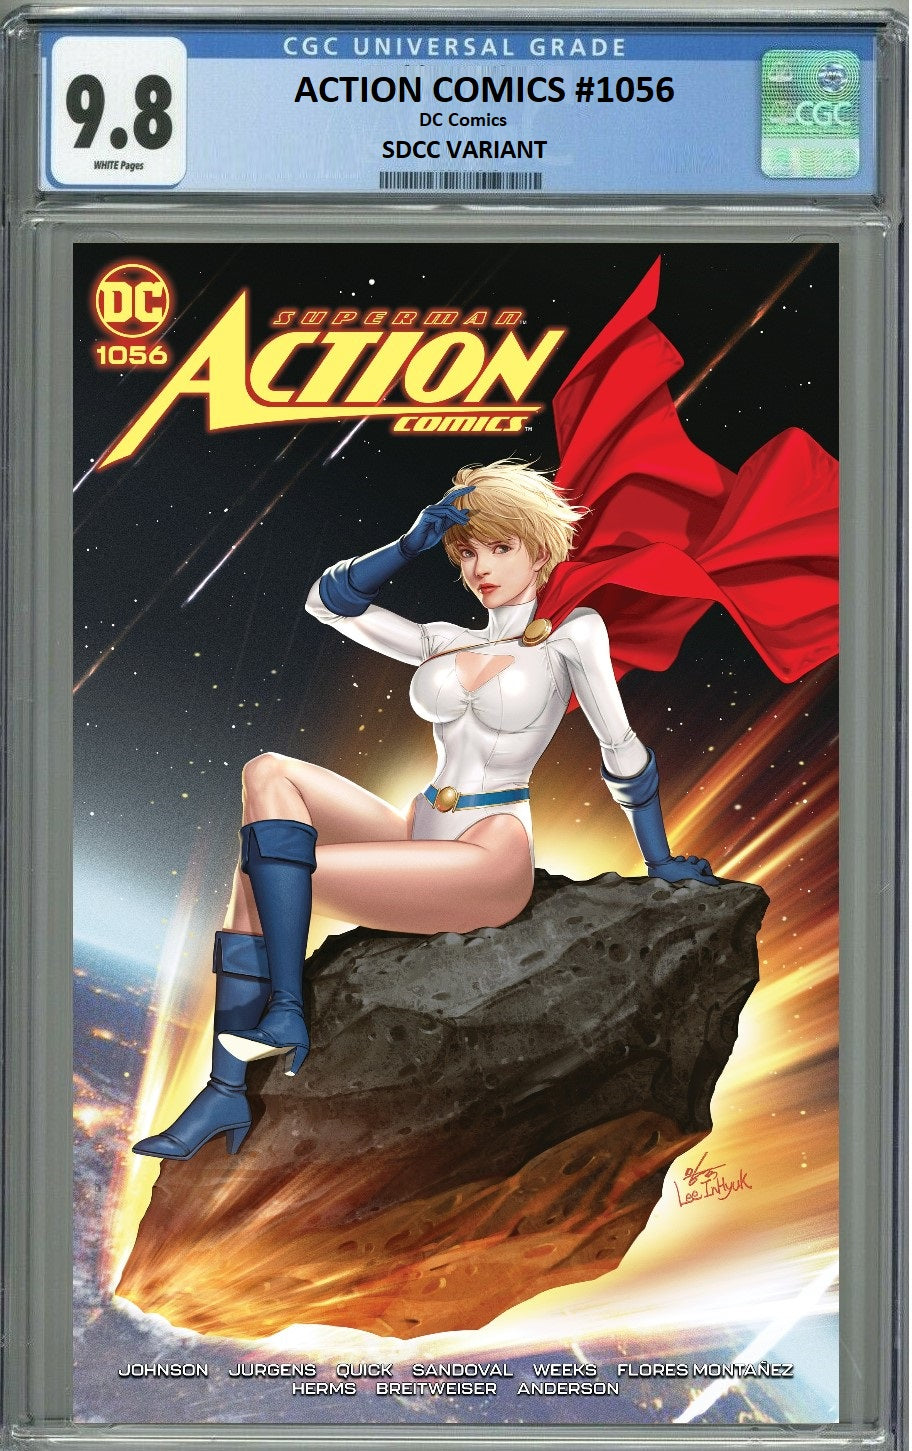 SDCC 2023 ACTION COMICS #1056 INHYUK LEE LOSH HOMAGE FOIL VARIANT LIMITED TO 1000 COPIES - RAW & GRADED OPTIONS